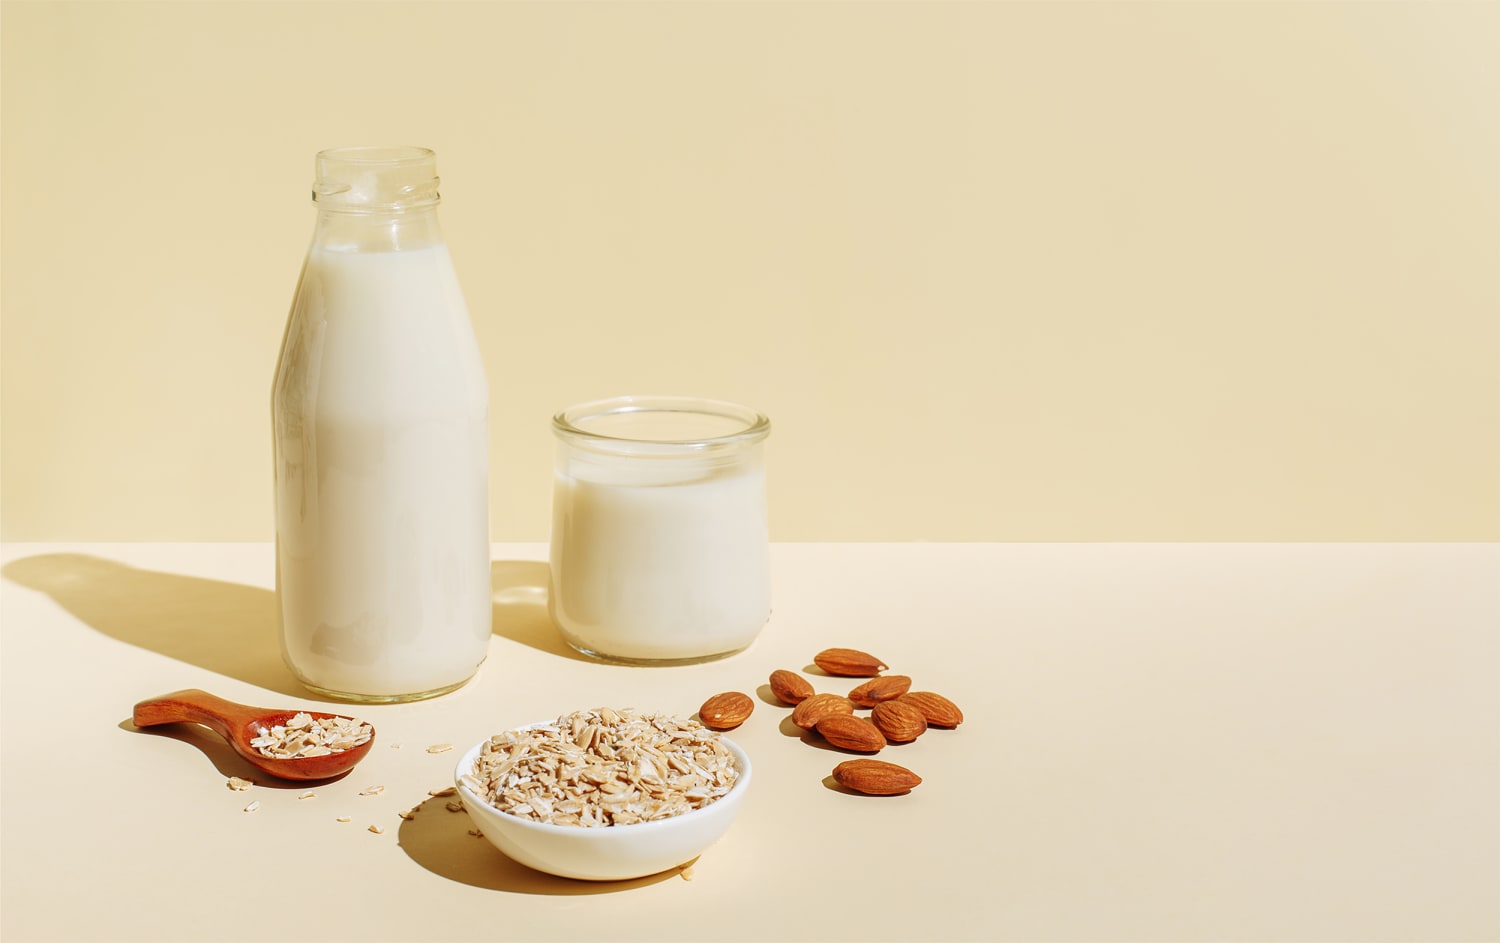 Is almond or oat milk healthier? A registered dietitian settles the debate, once and for all